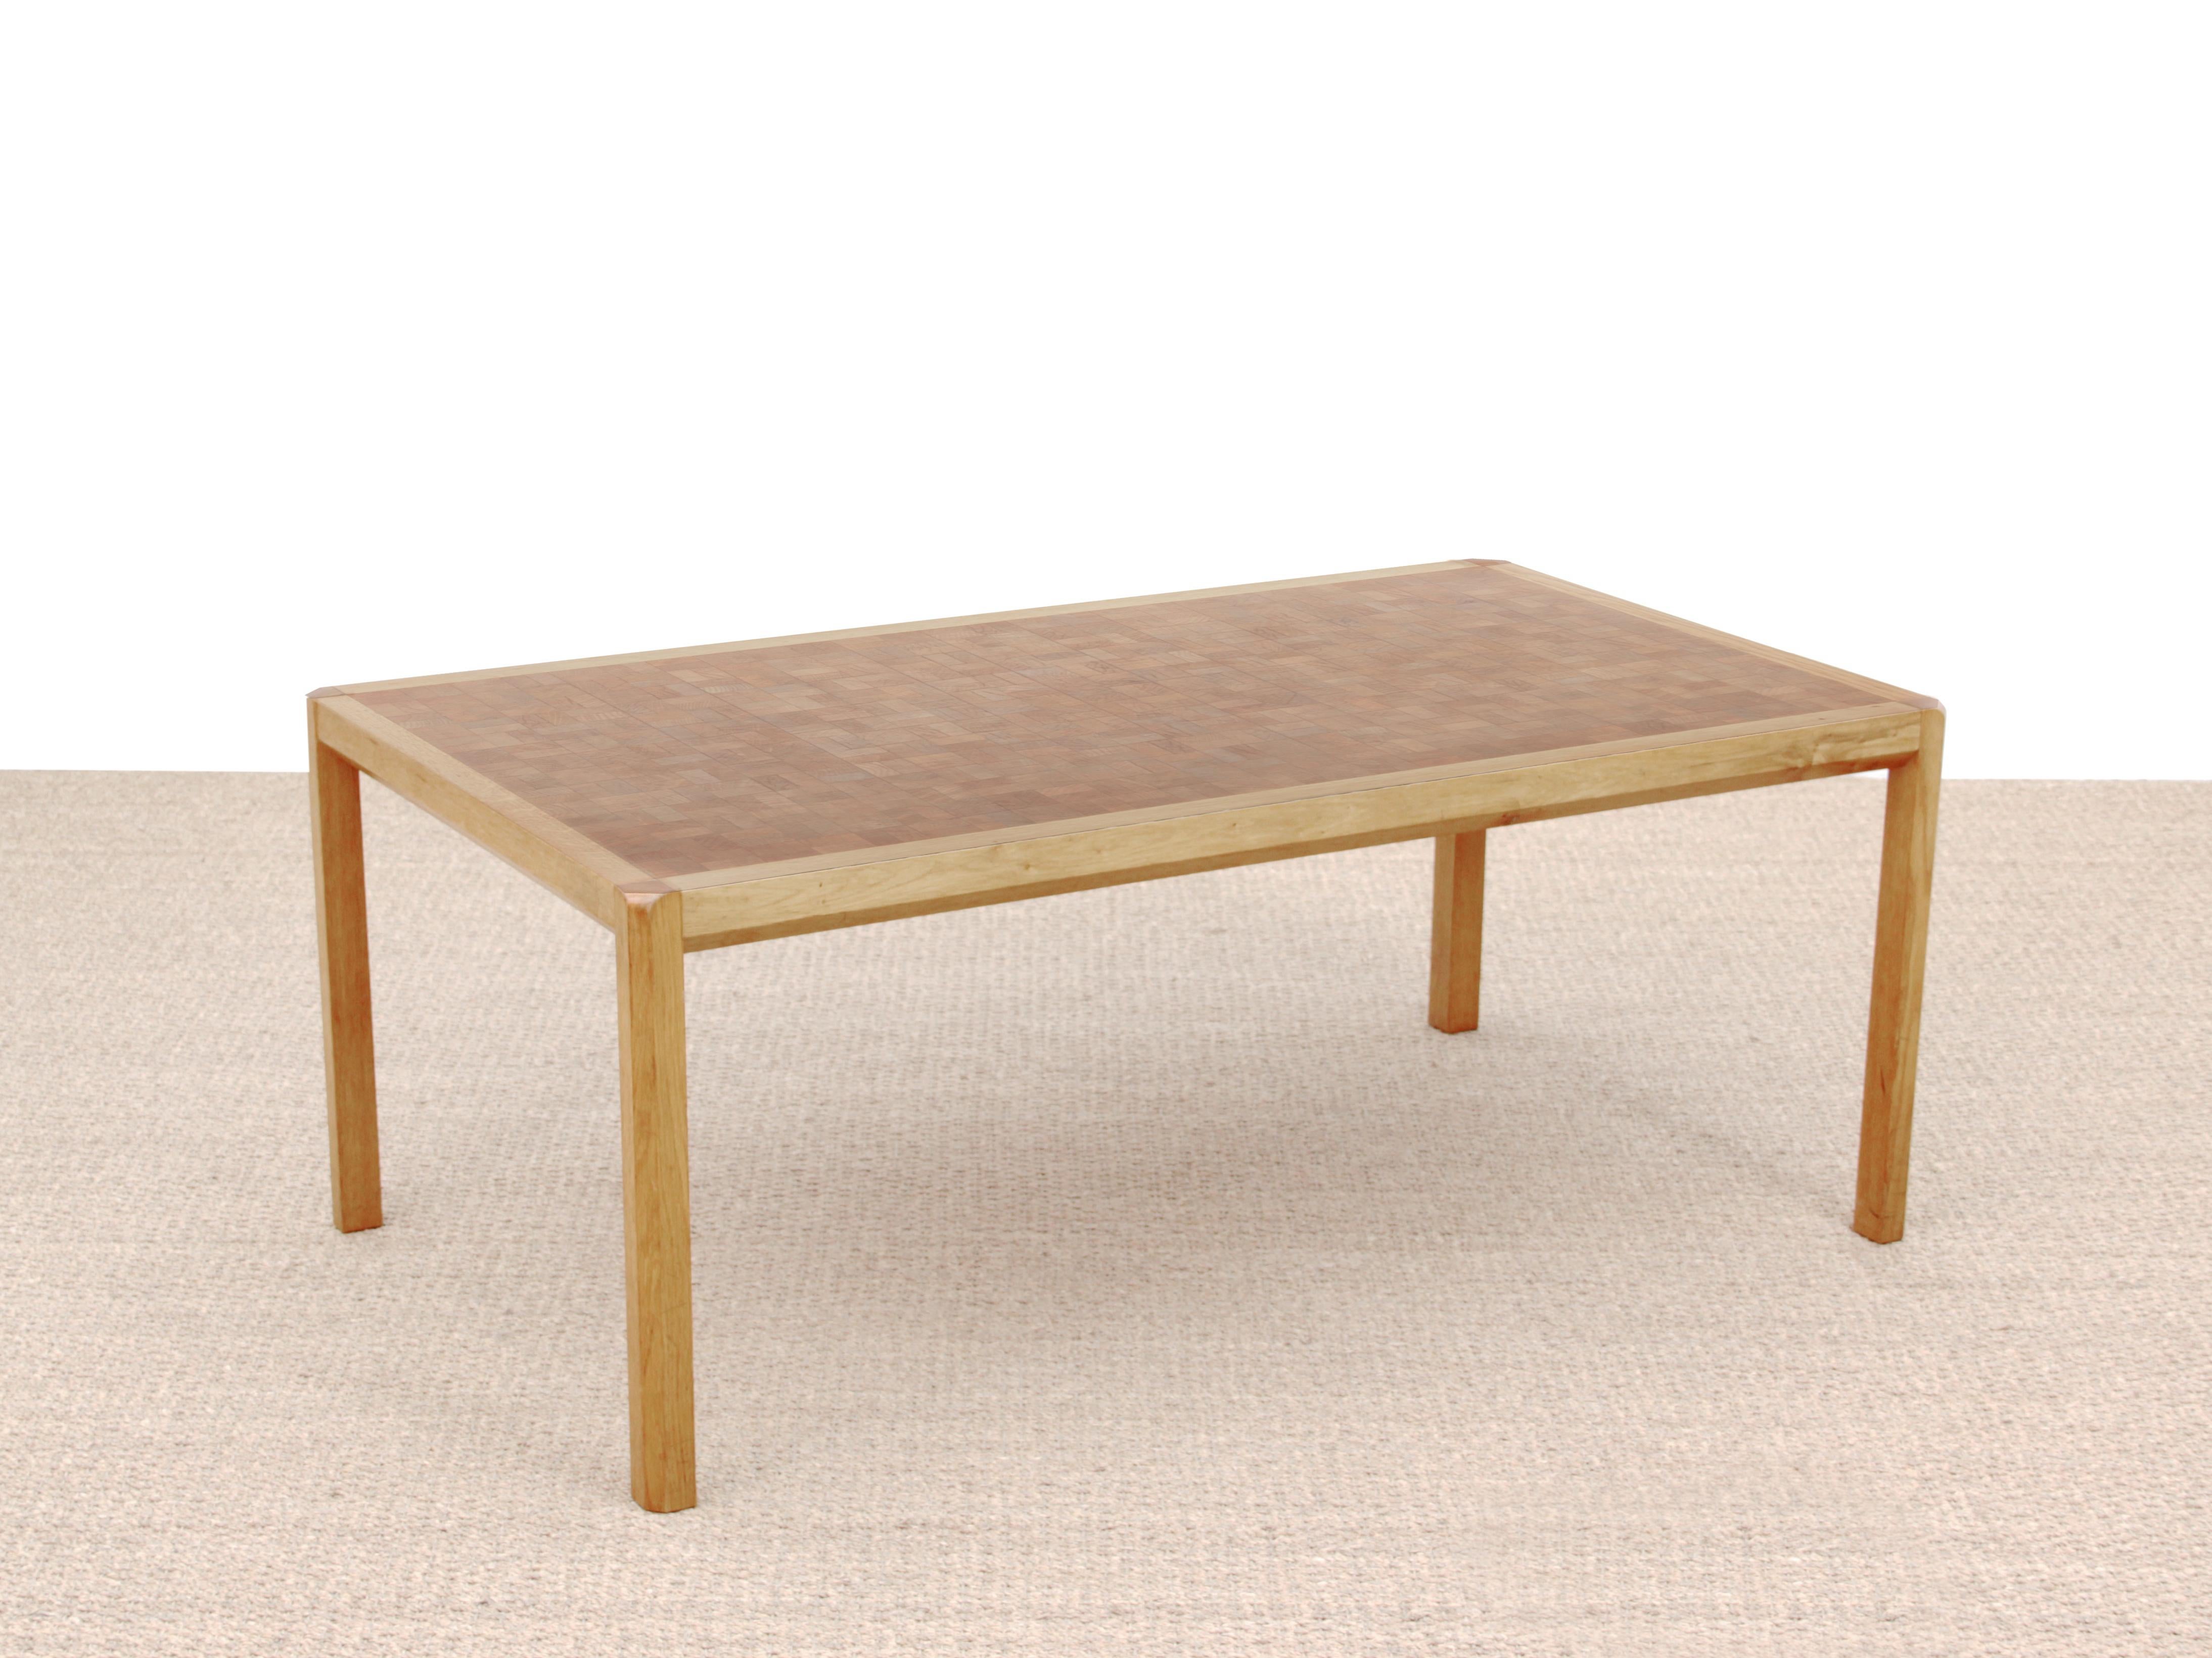 Mid-Century Modern Scandinavian large coffee table in oak by Rolf Middelboe & Gorm Lindum with a bitmap structured tabletop, made of 1600 cubical solid pieces of oak combined to create an interesting structure and pattern.